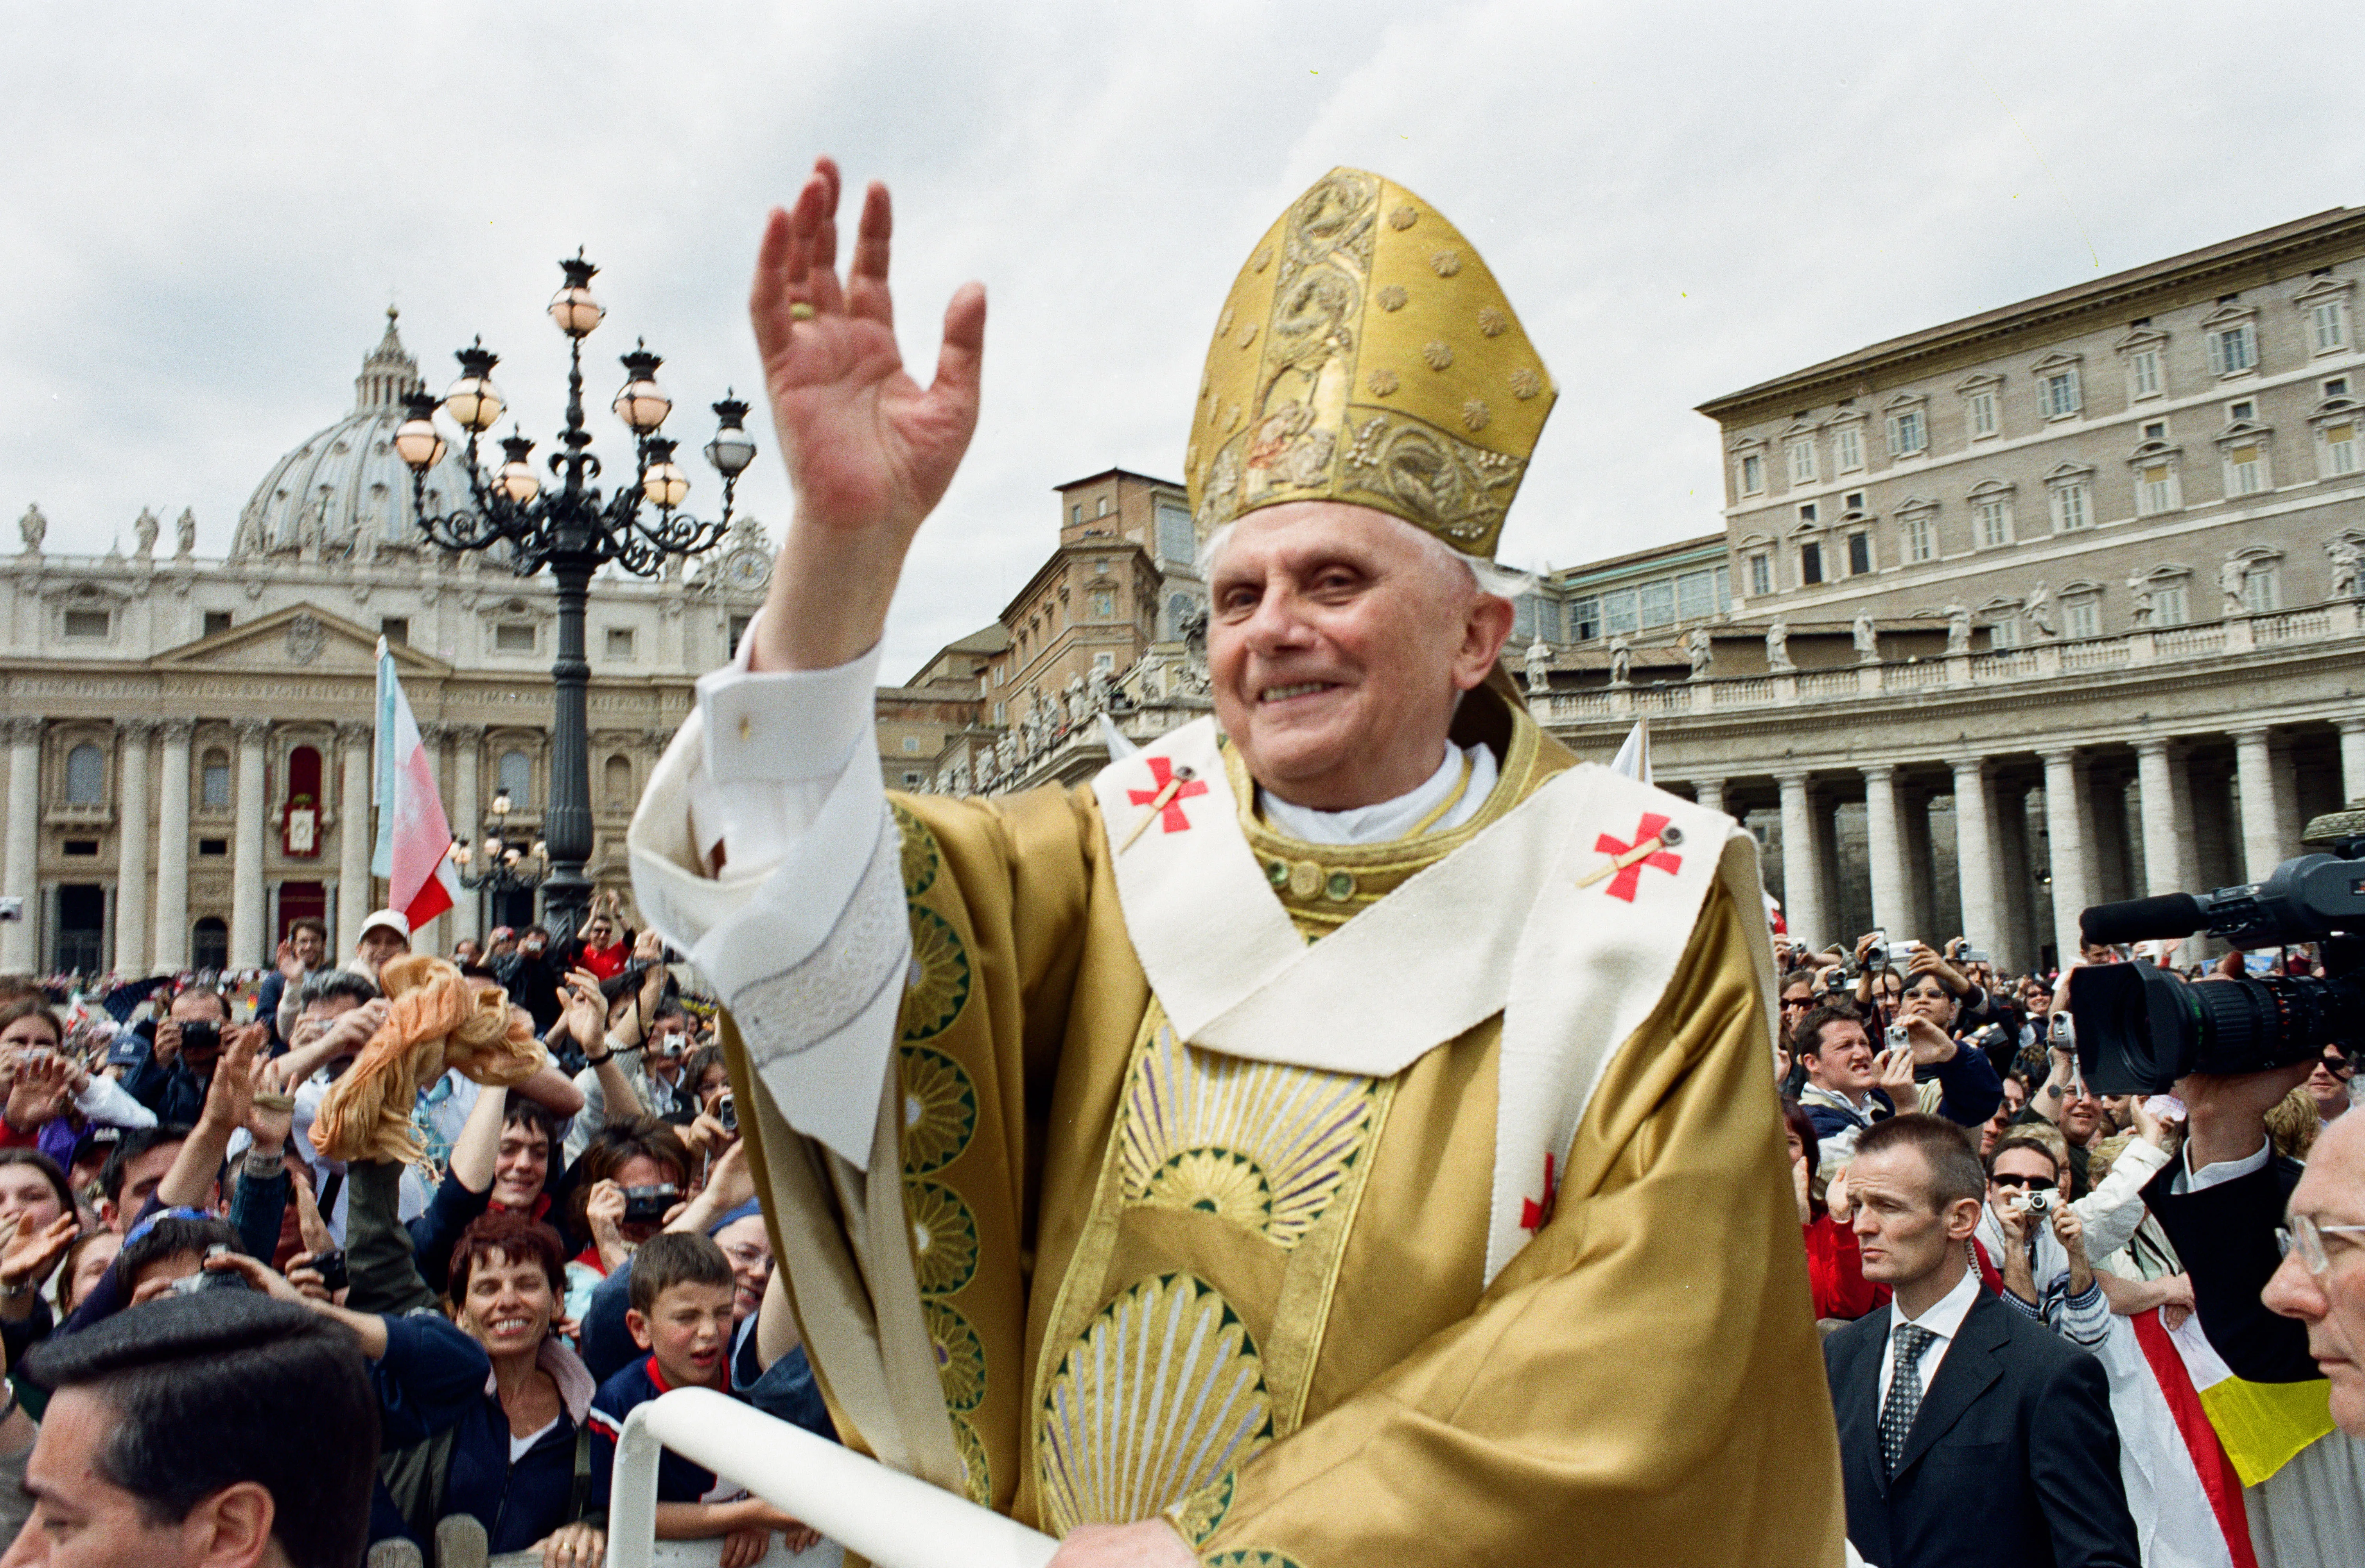 Pope Benedict XVI greets pilgrims in St. Peter's Square during his inaugural Mass April 24, 2005, as the Catholic Church's 265th pope.?w=200&h=150